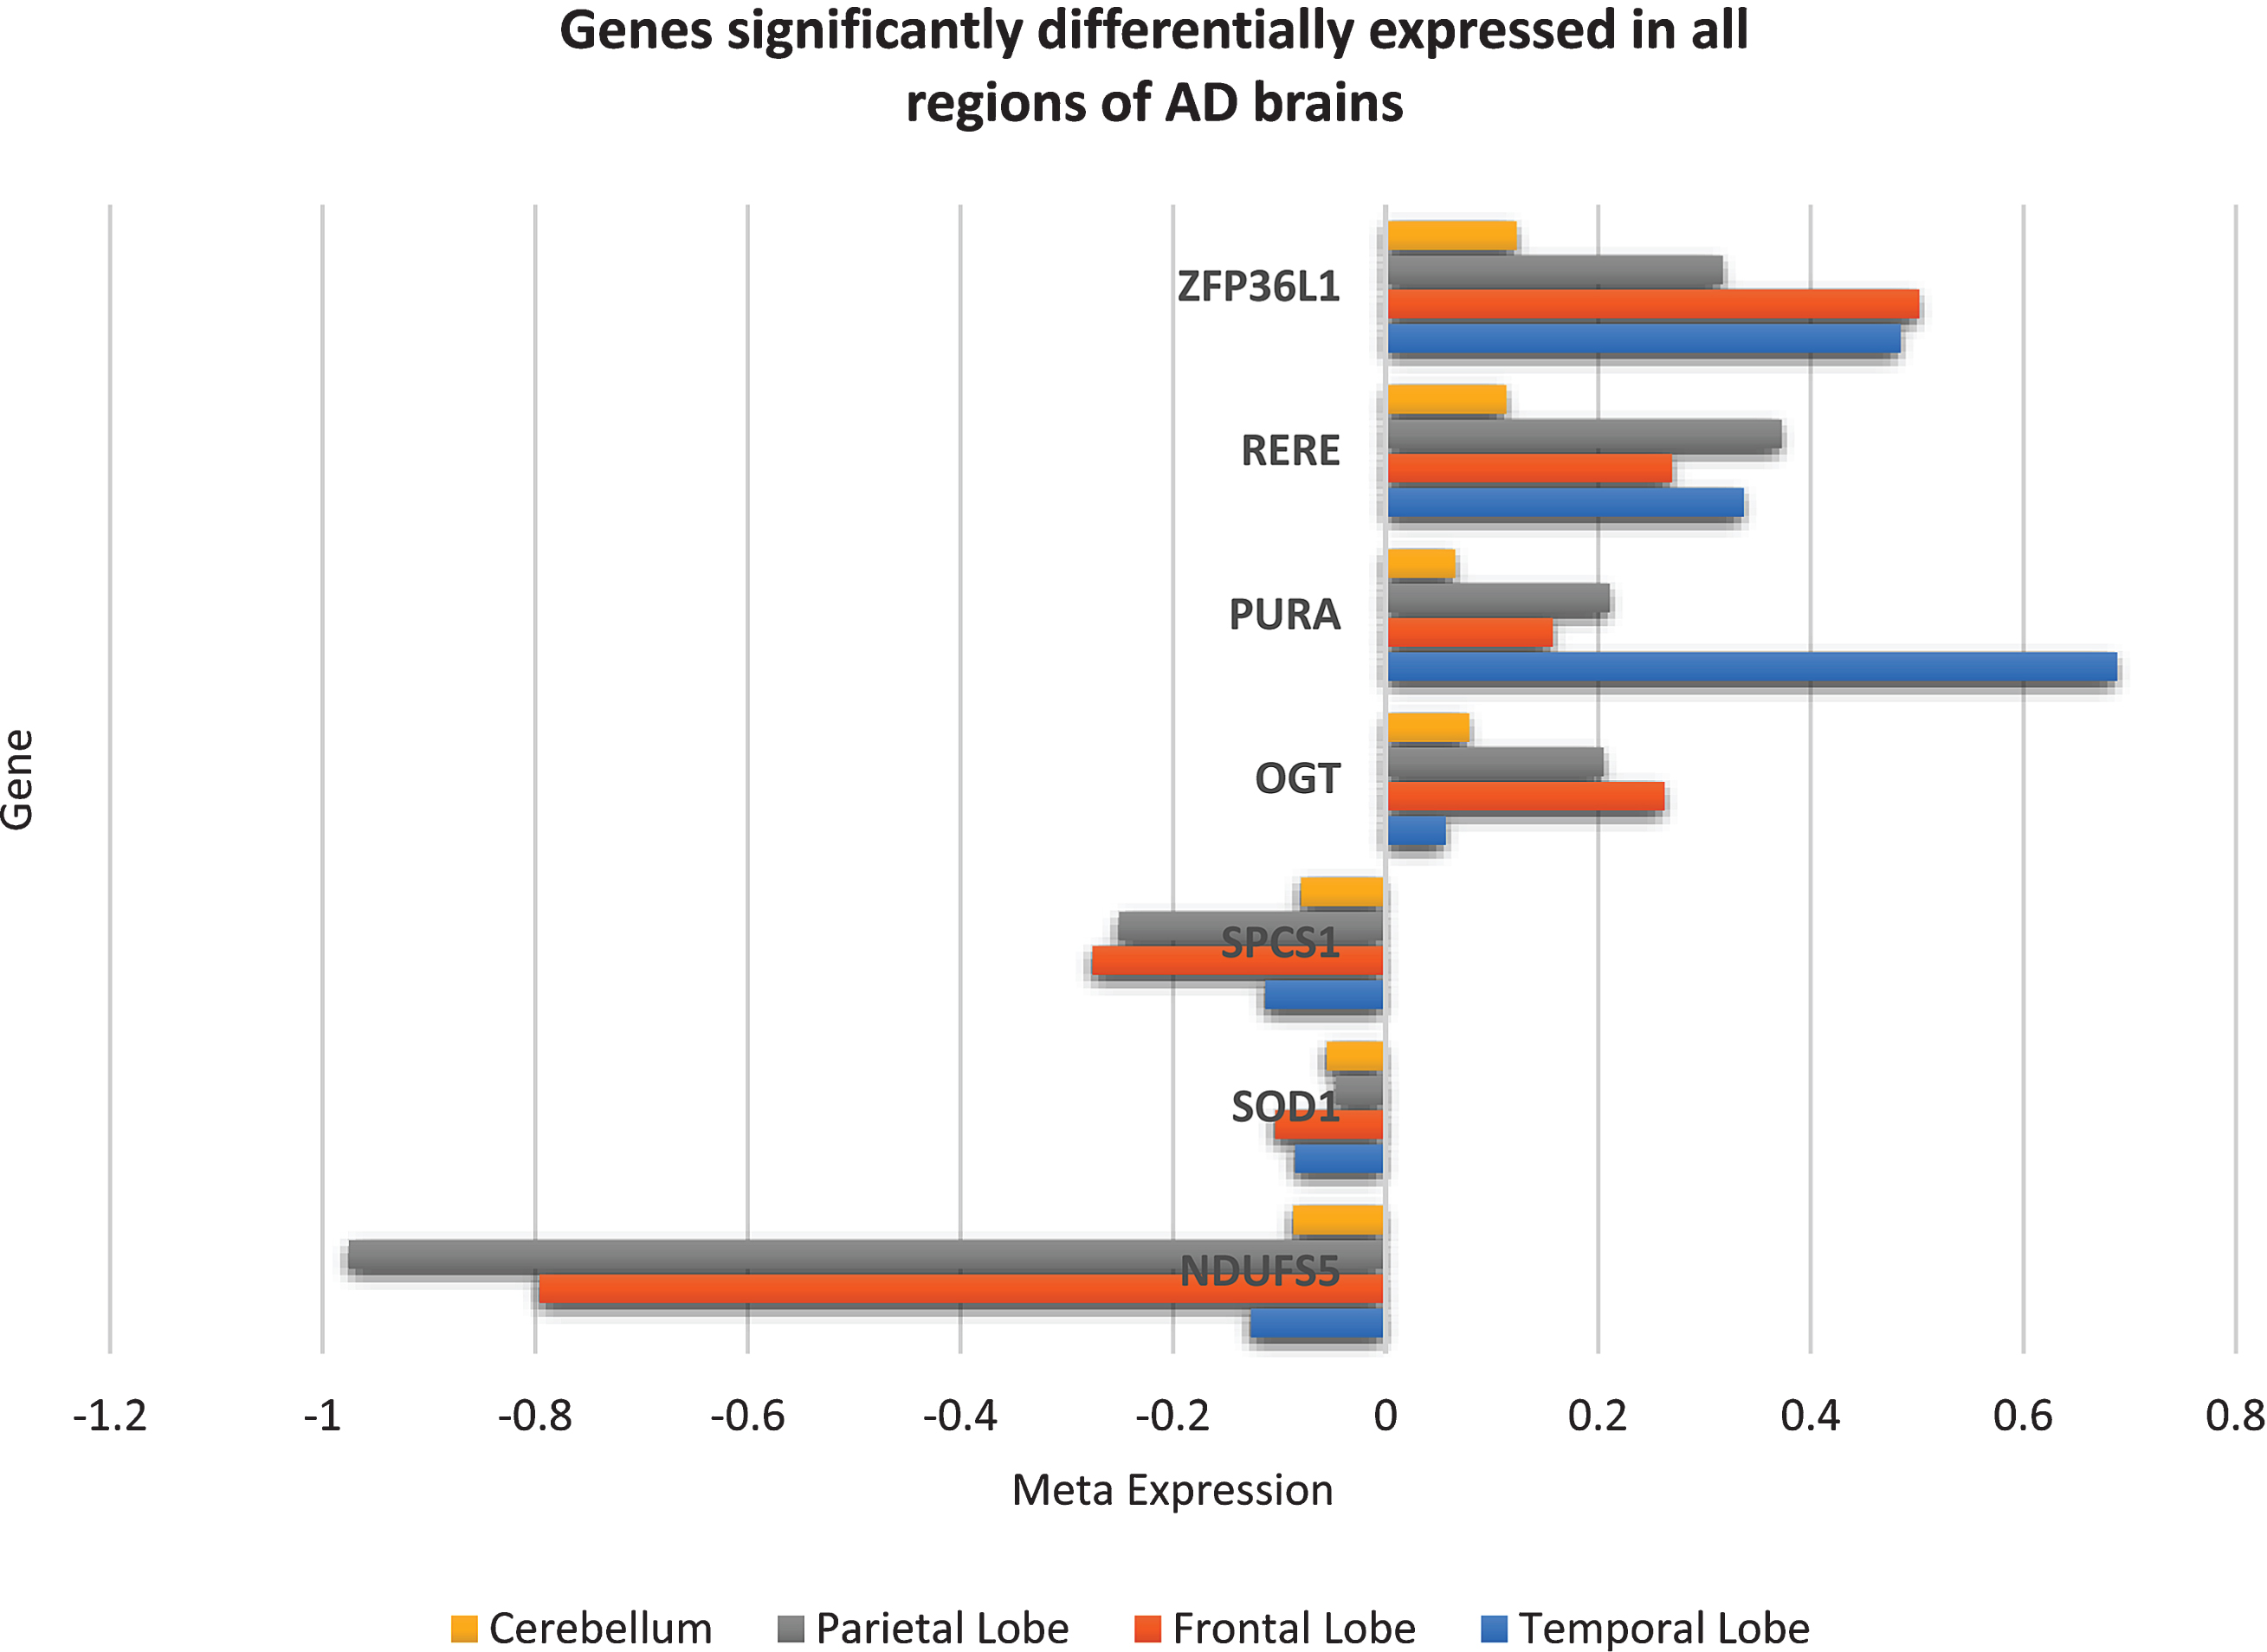 Seven genes consistently significantly differentially expressed in the same direction in all regions of AD brains but not in schizophrenia, bipolar disorder, Huntington’s disease, major depressive disorder, or Parkinson’s disease brains. These seven genes can be assumed to be unique to AD brains and may play an important role in disease mechanisms.